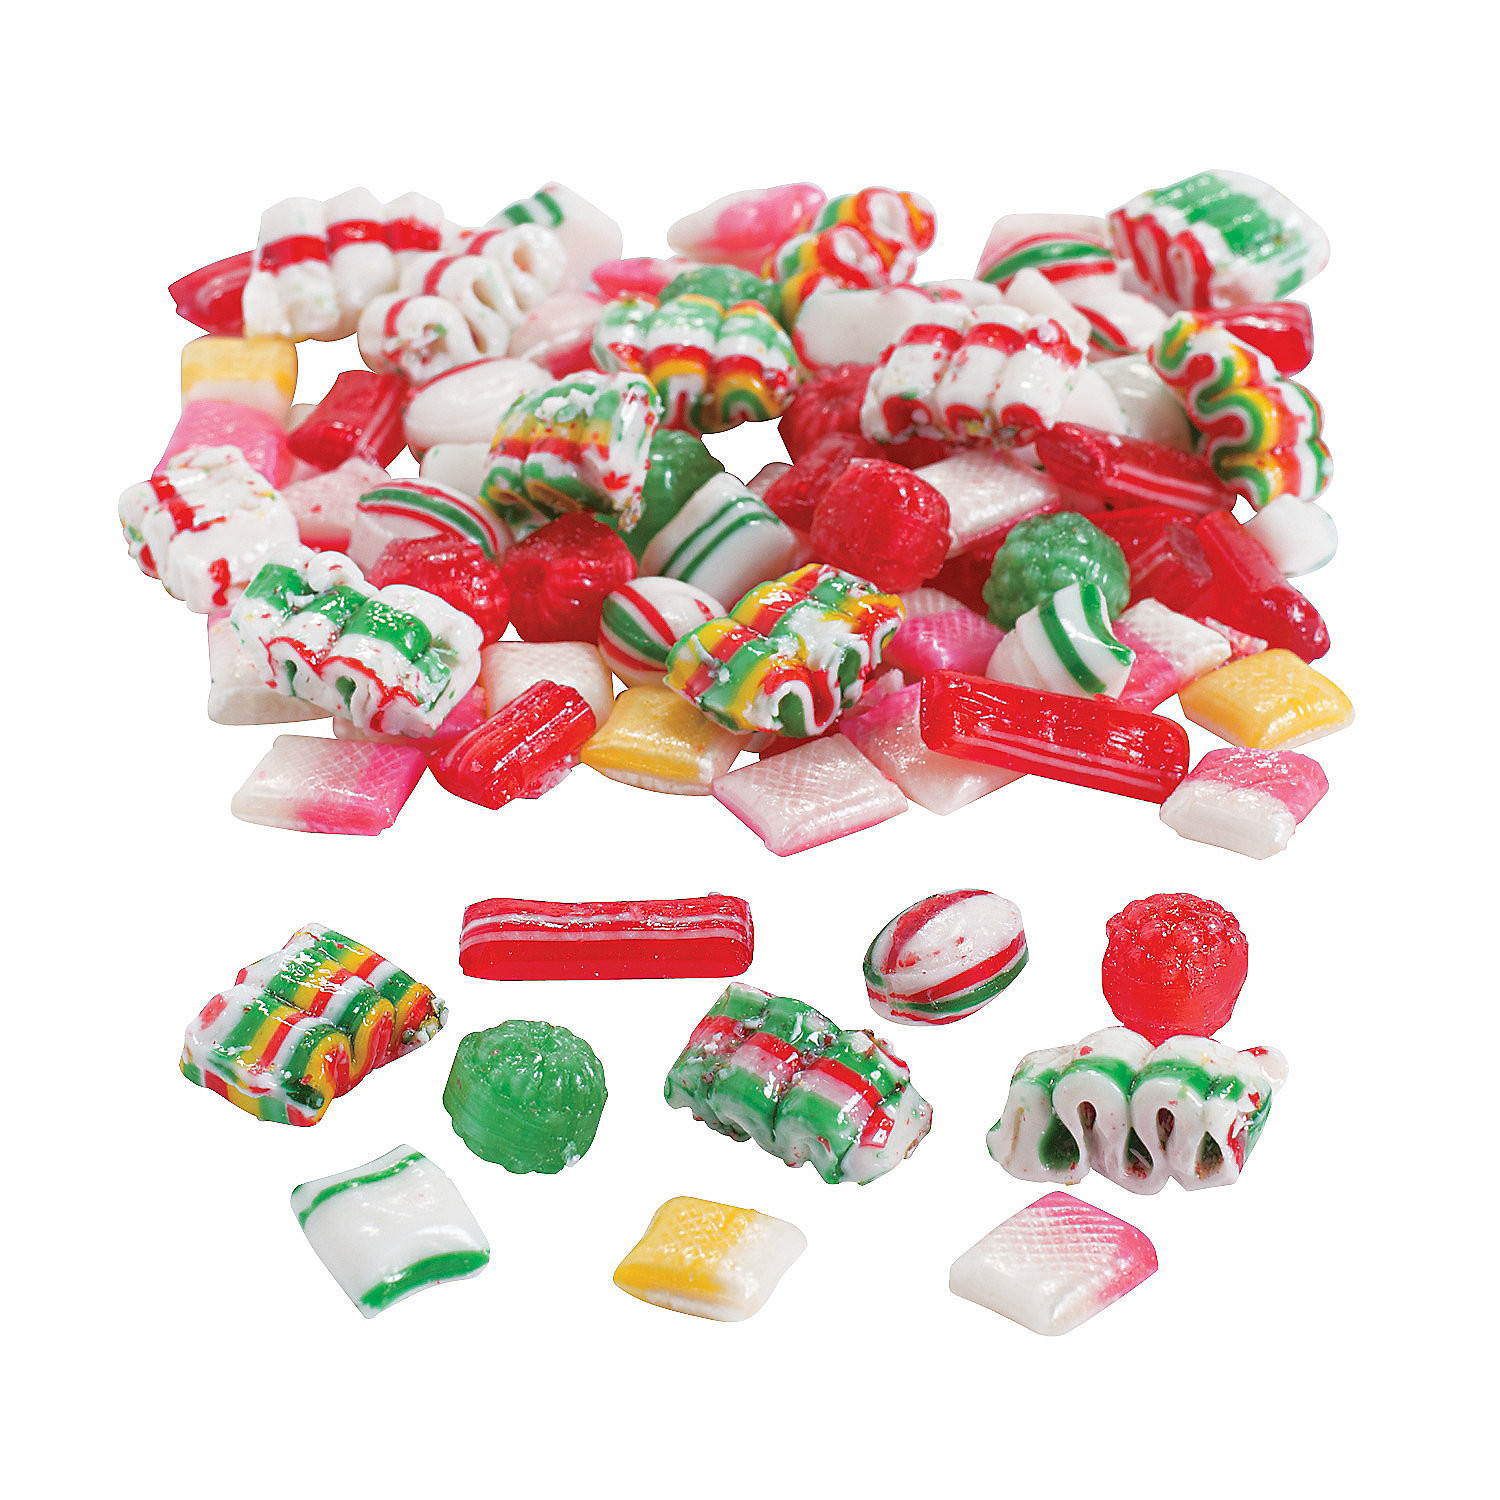 Brach Christmas Candy
 Brach’s Holiday Old Fashioned Candy Mix Oriental